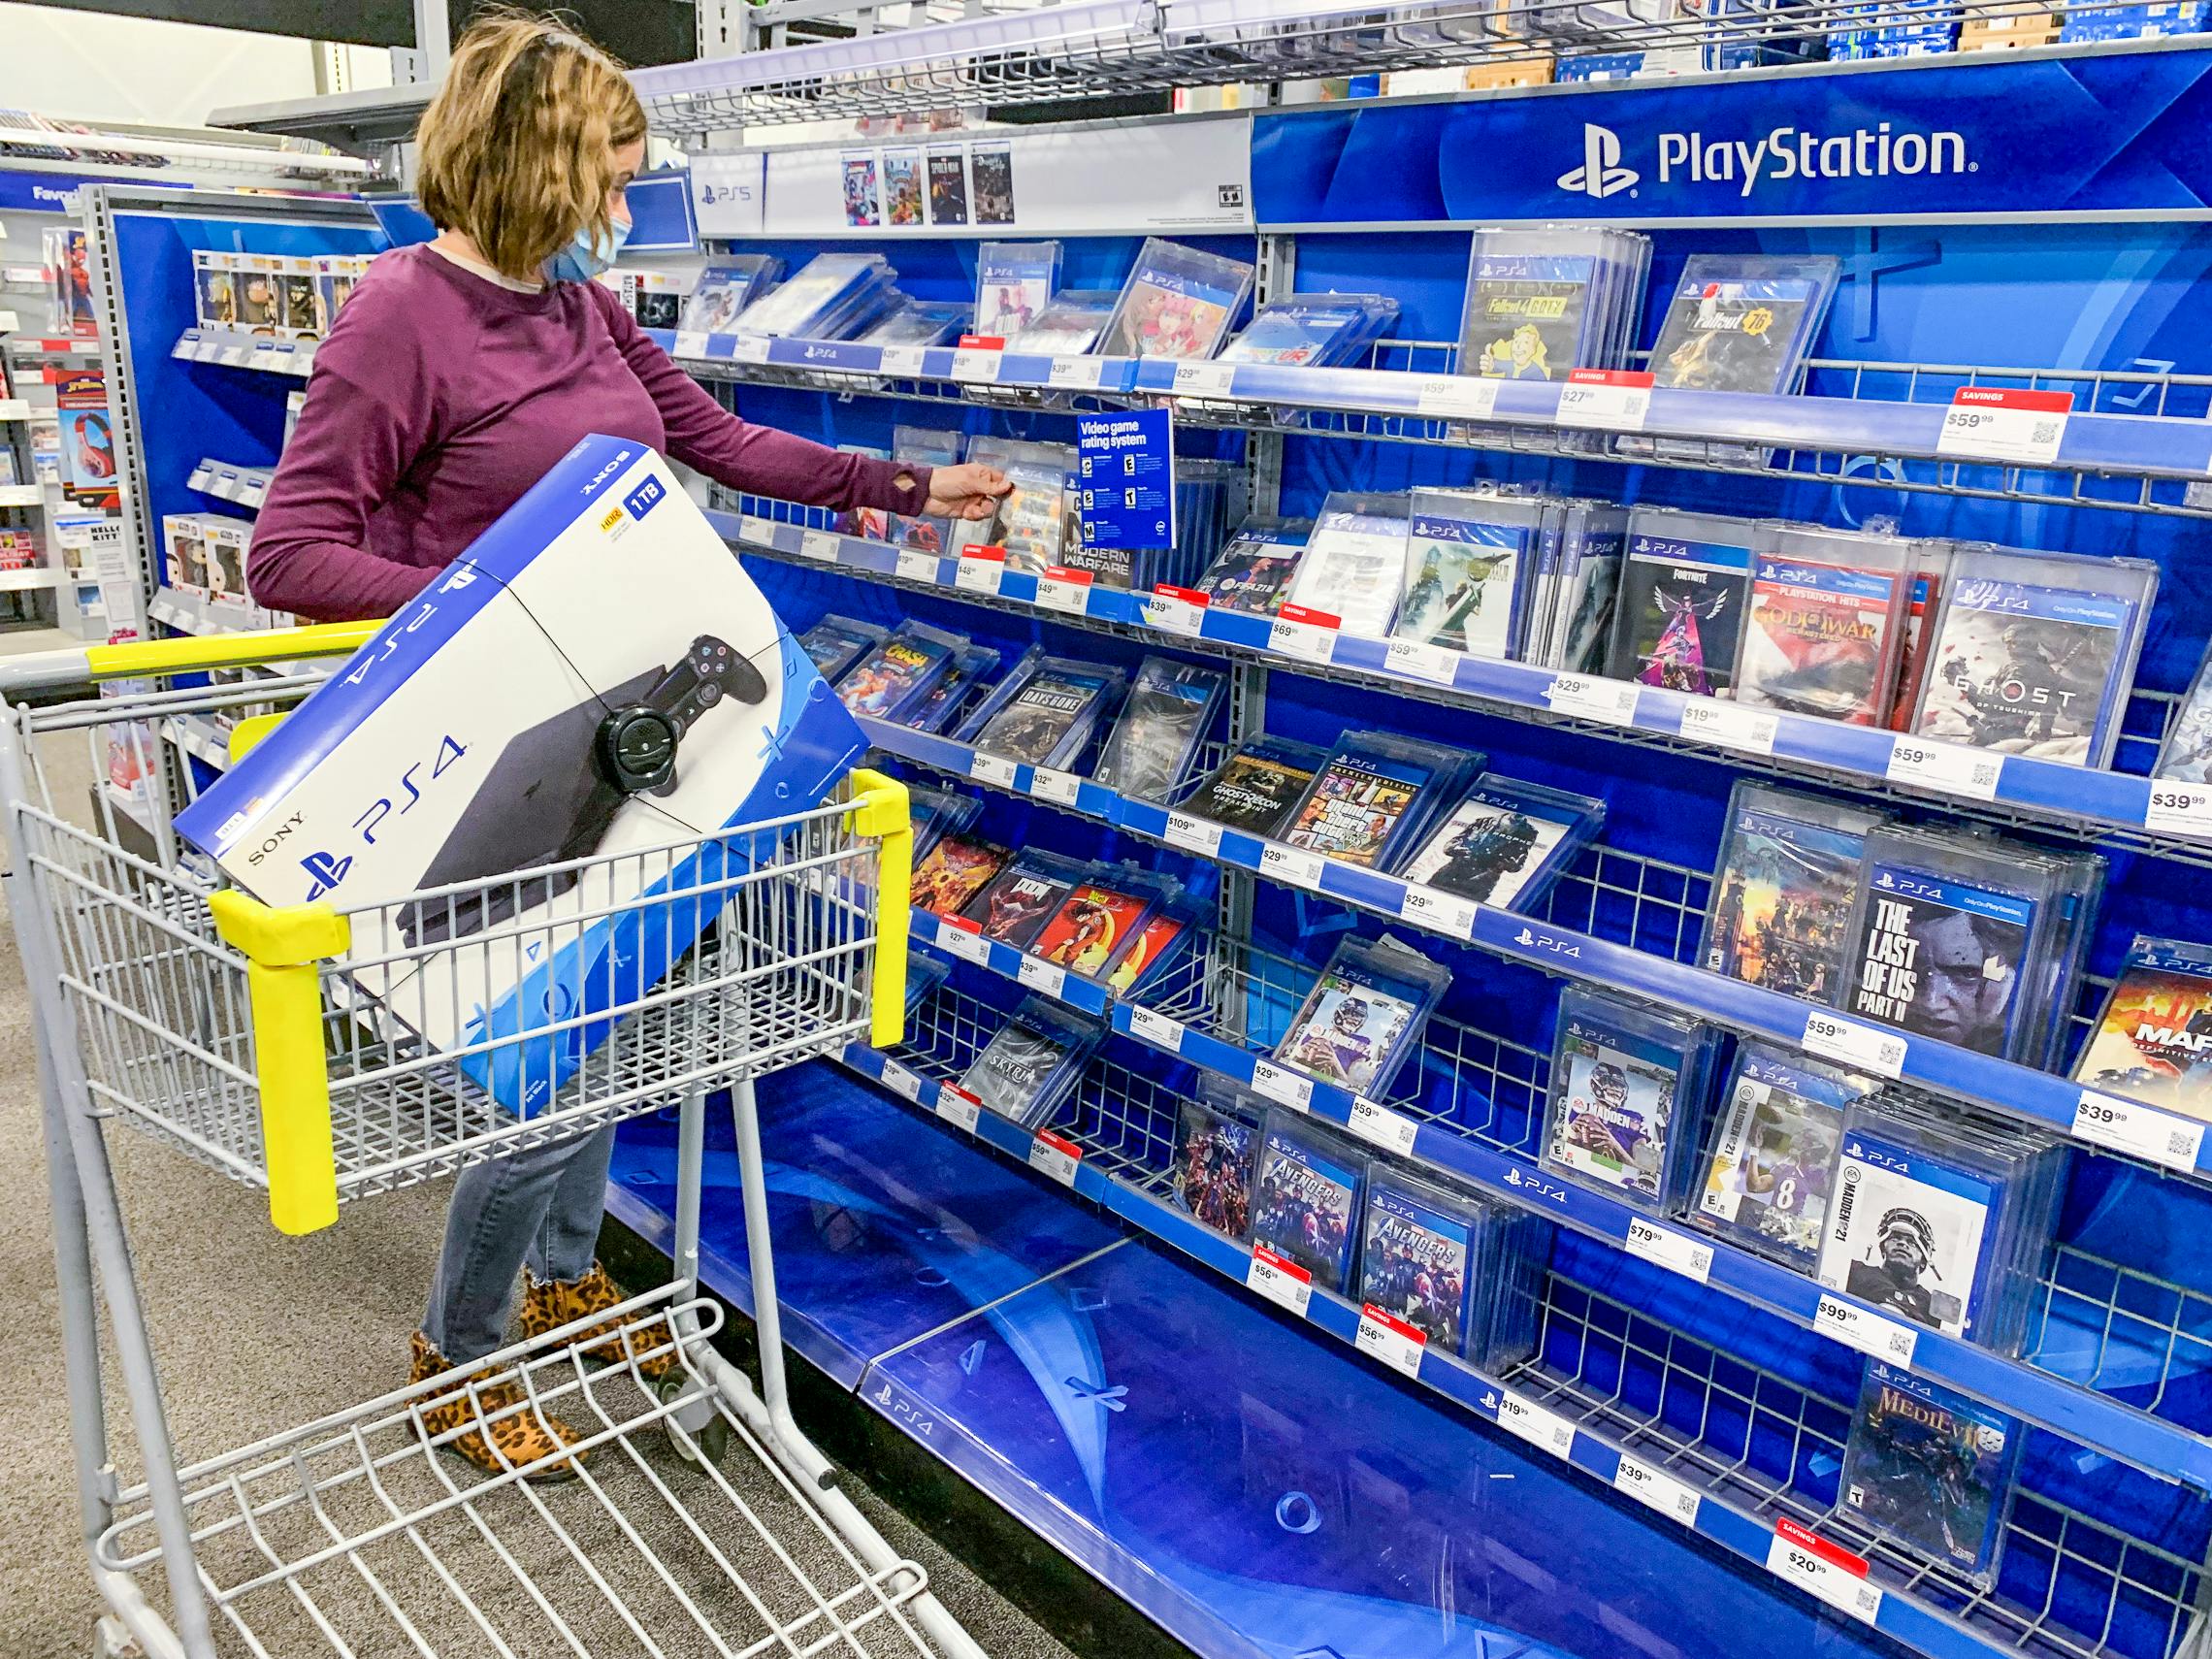 A person shopping for PlayStation games in Best Buy with a PS4 in the cart.